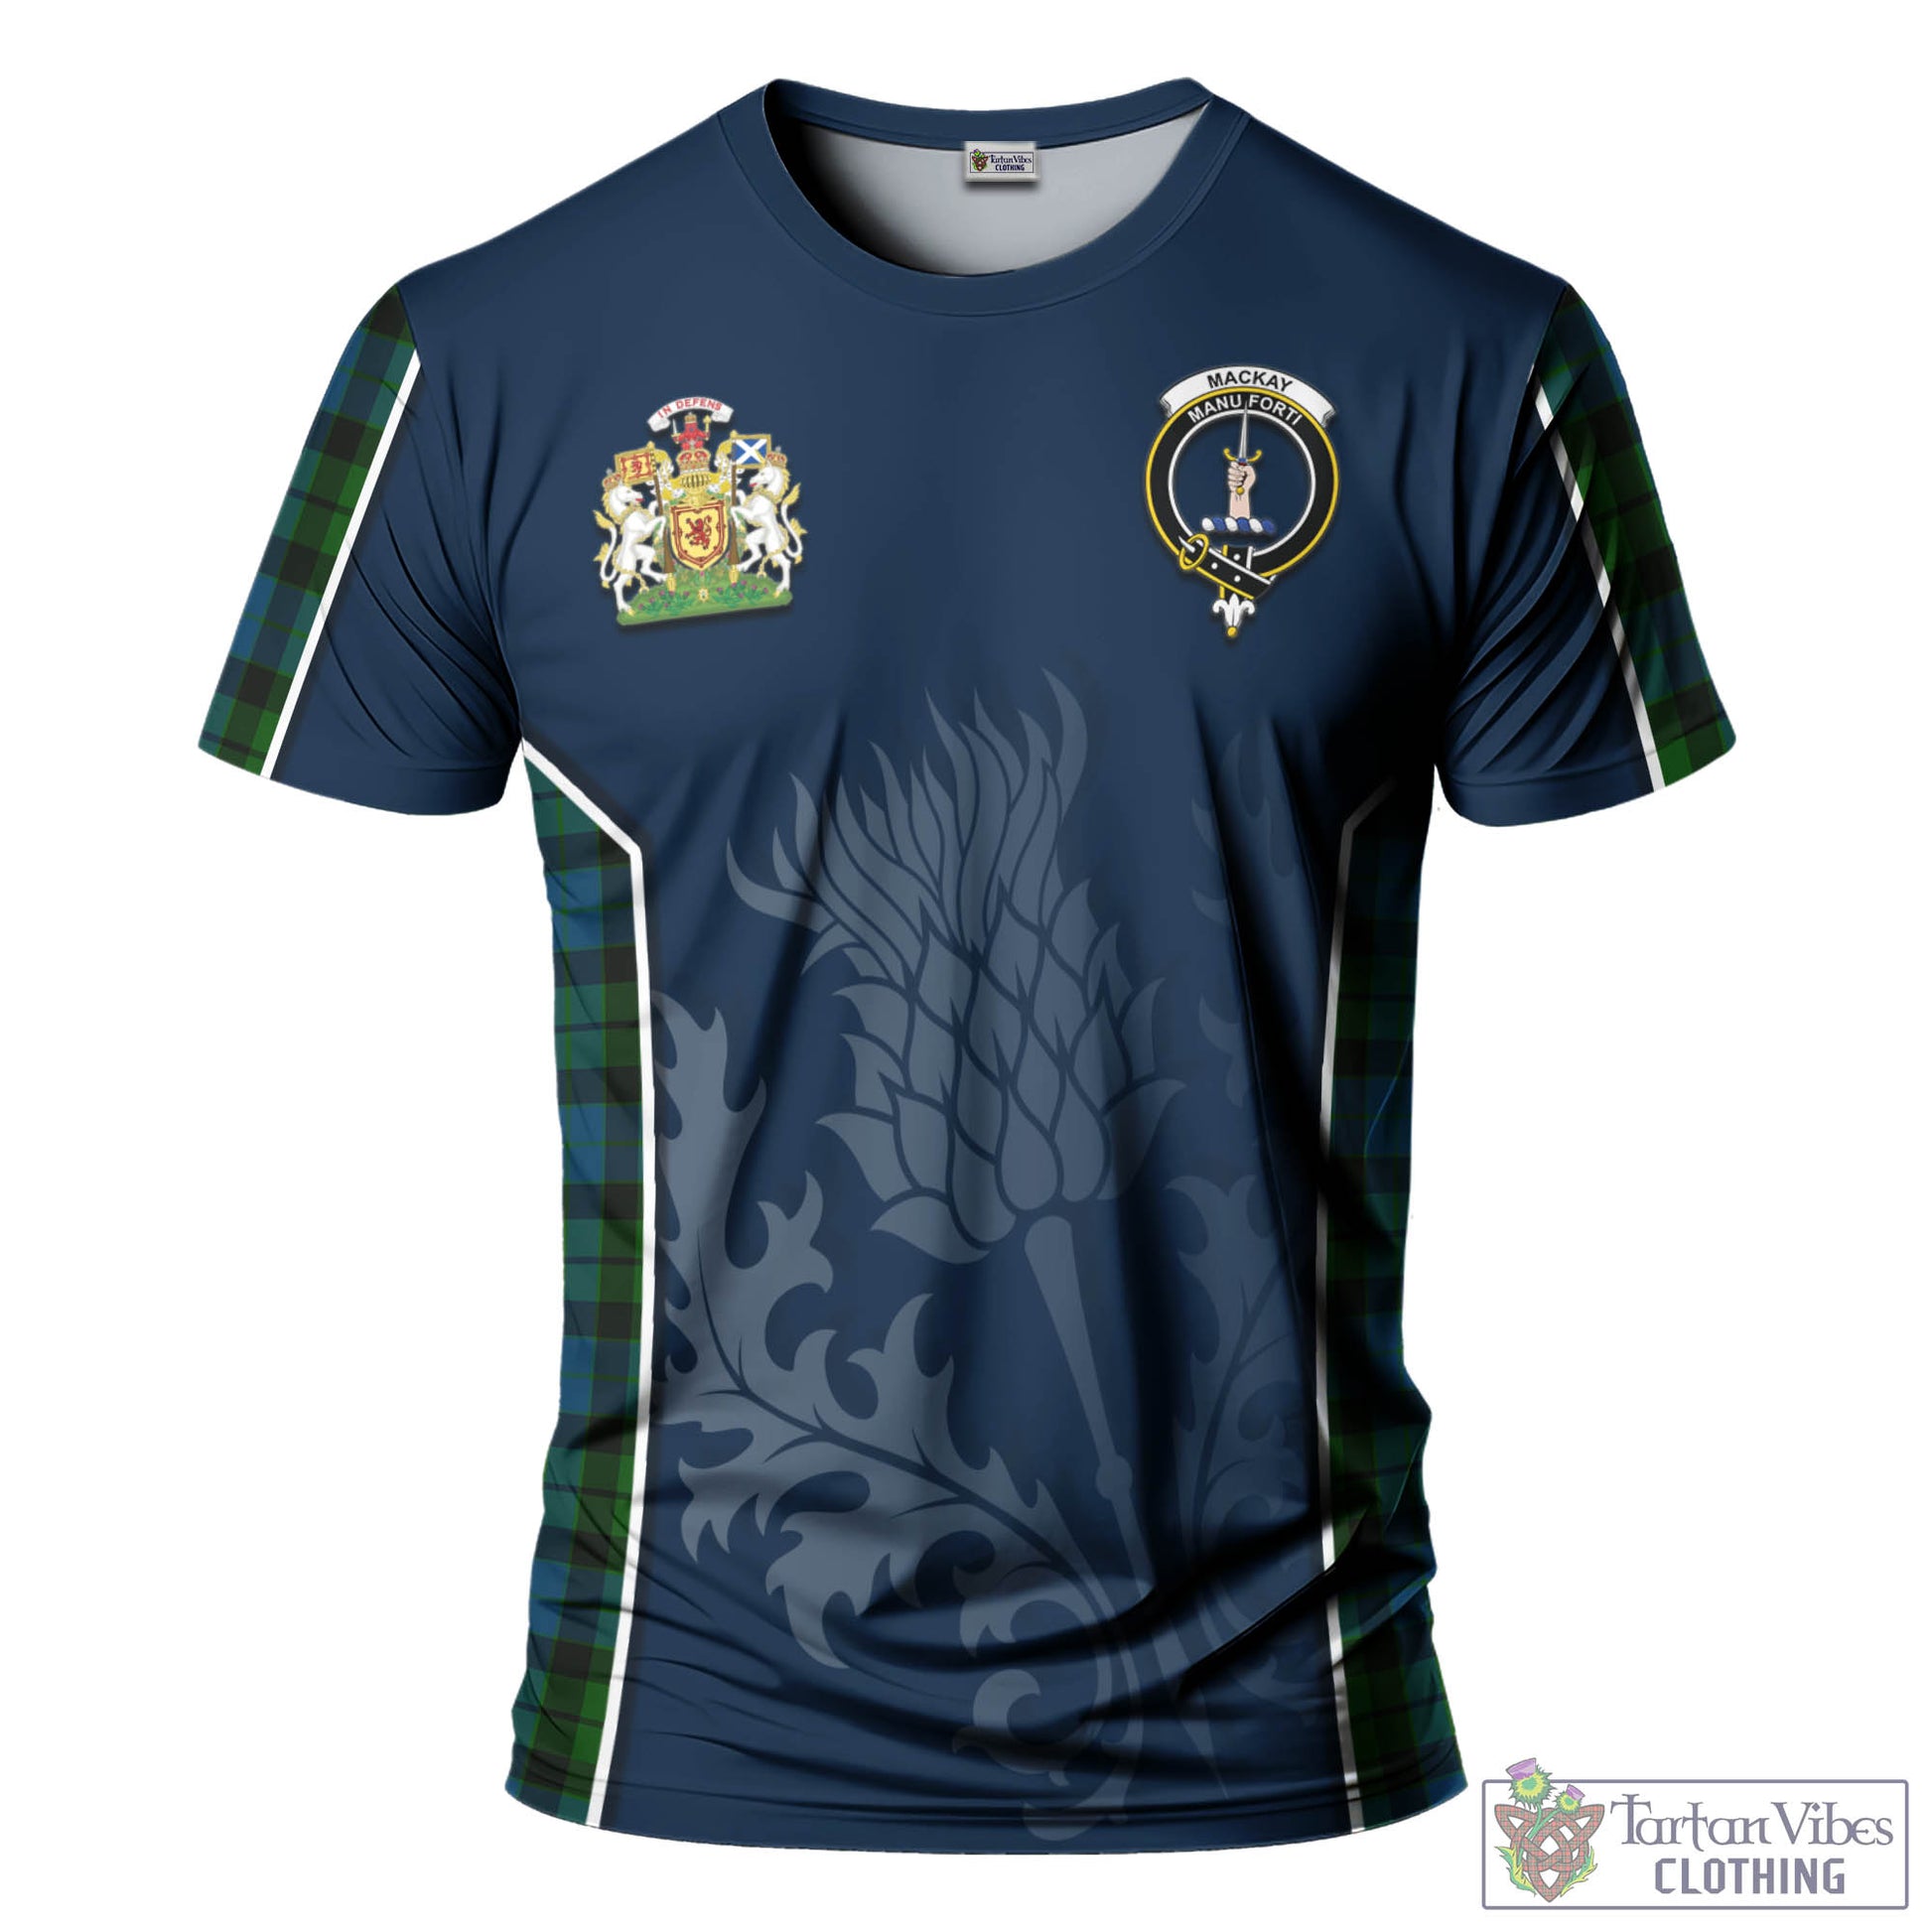 Tartan Vibes Clothing MacKay Modern Tartan T-Shirt with Family Crest and Scottish Thistle Vibes Sport Style